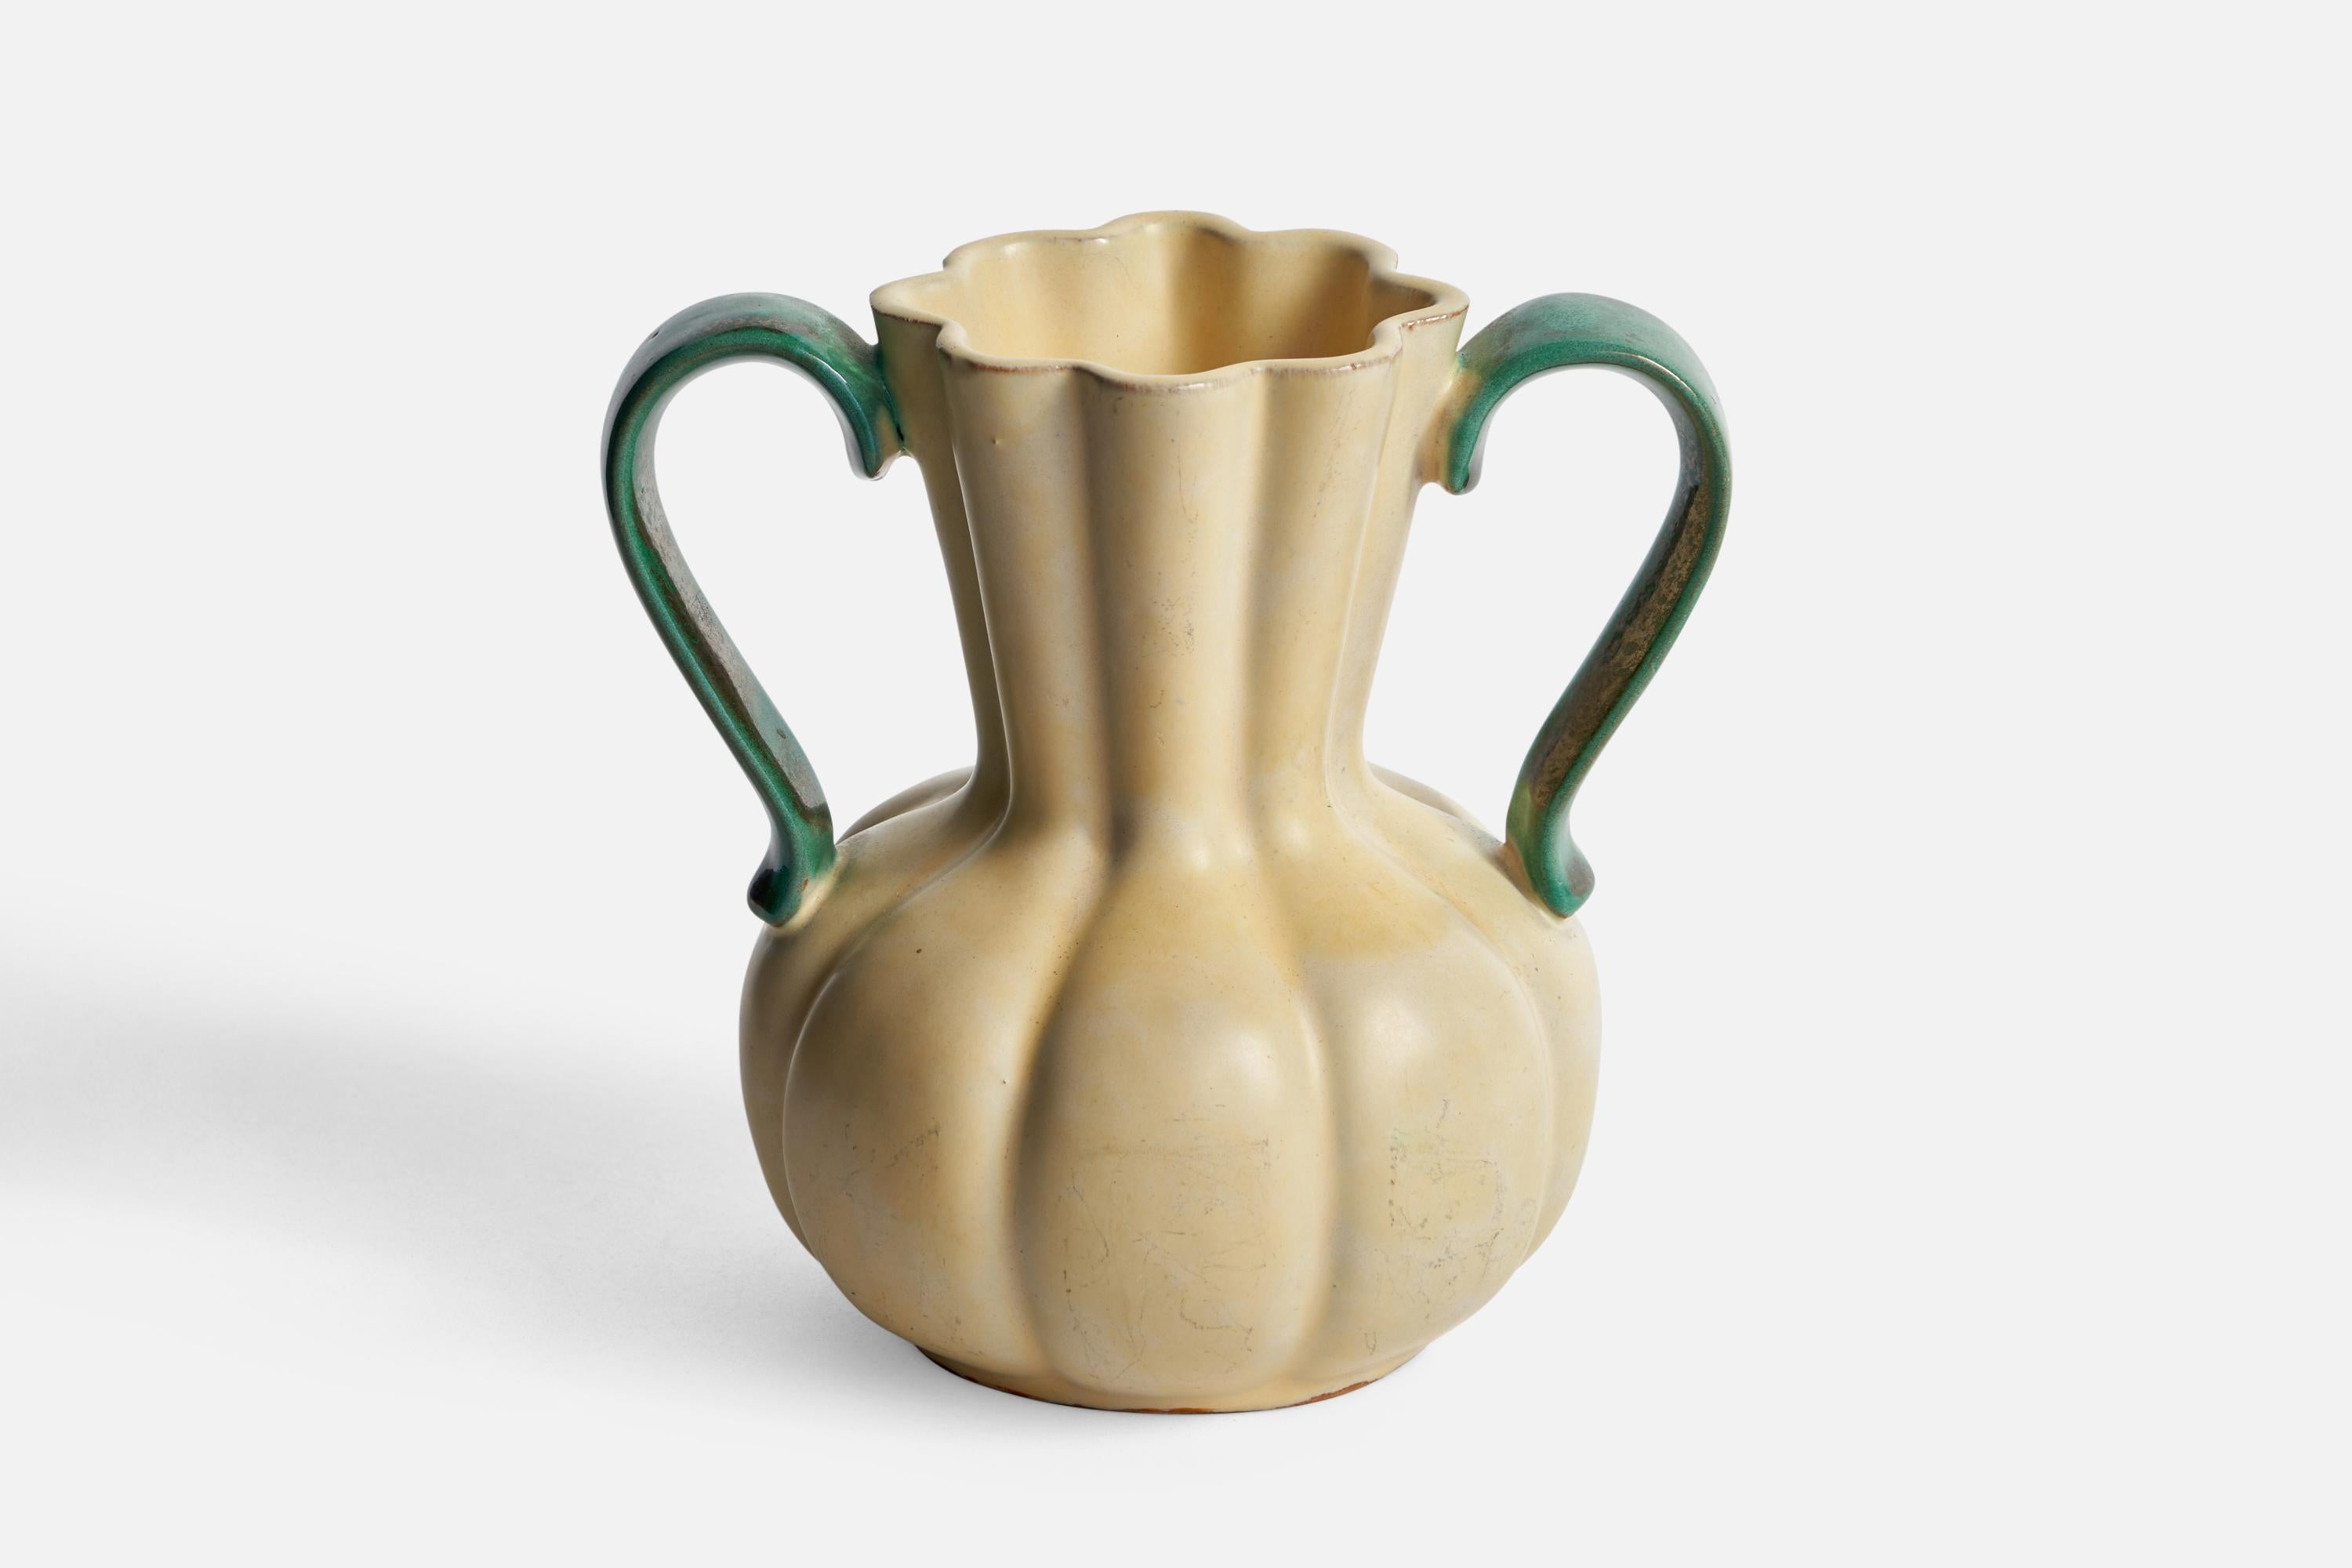 A cream-white and green-glazed fluted vase designed and produced by Upsala Ekeby, Sweden, 1930s.